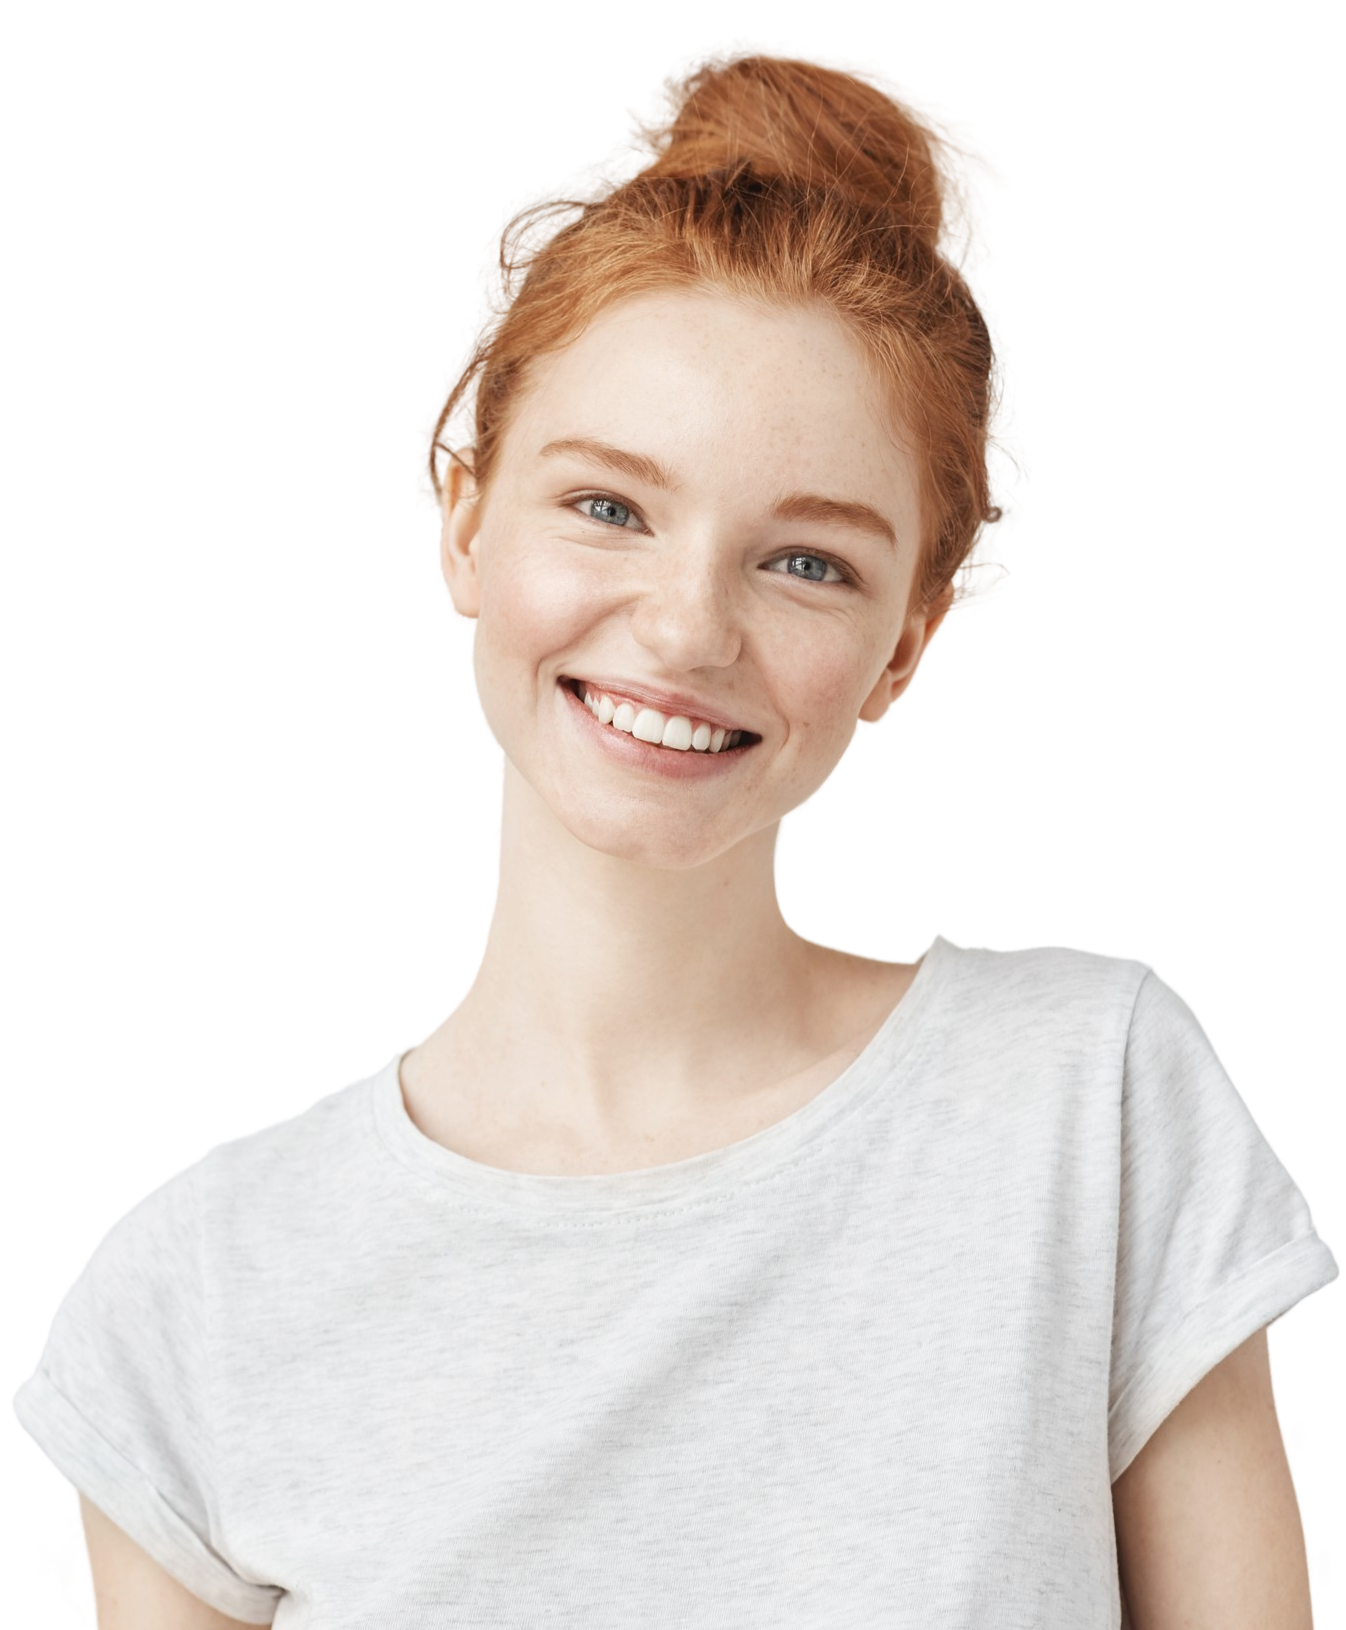 Headshot Portrait of happy ginger girl with freckles smiling